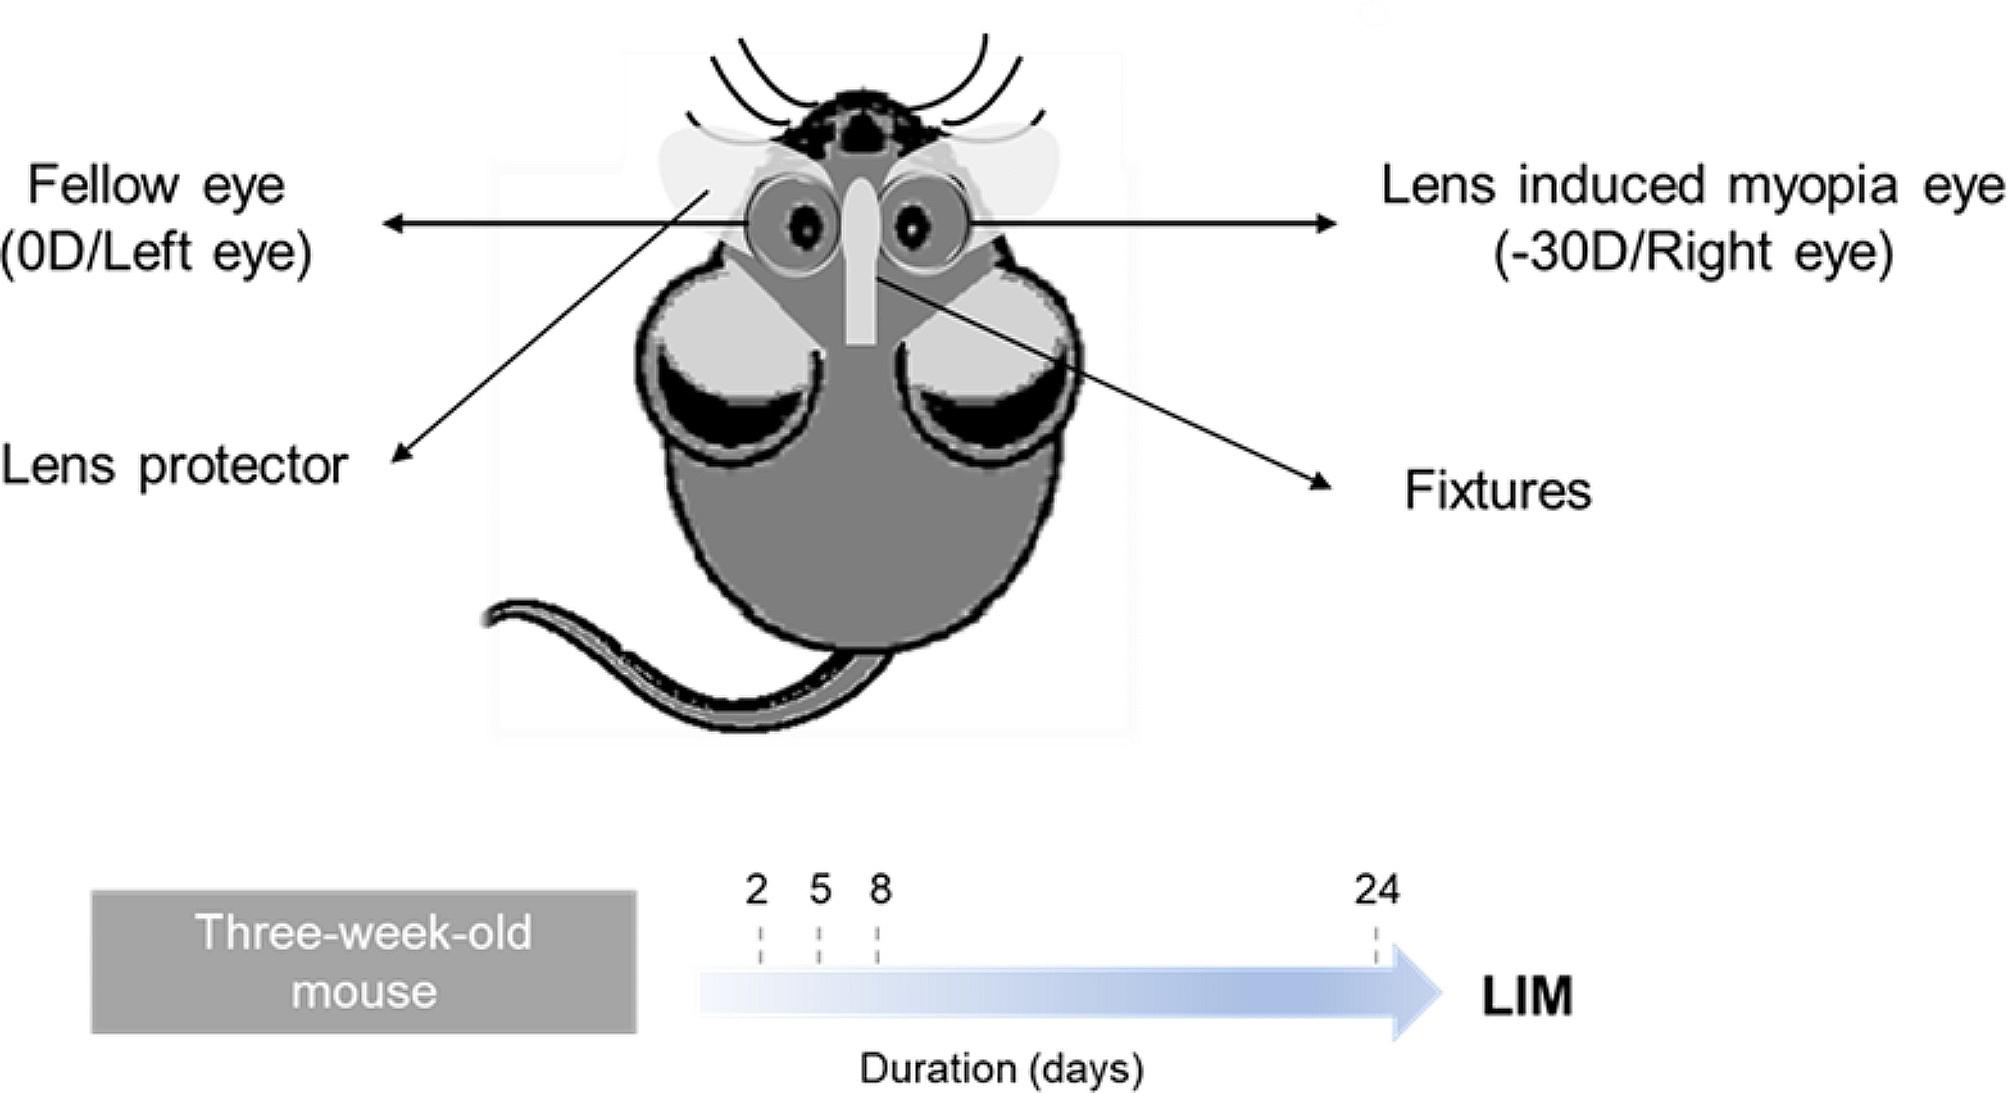 Scleral remodeling during myopia development in mice eyes: a potential role of thrombospondin-1